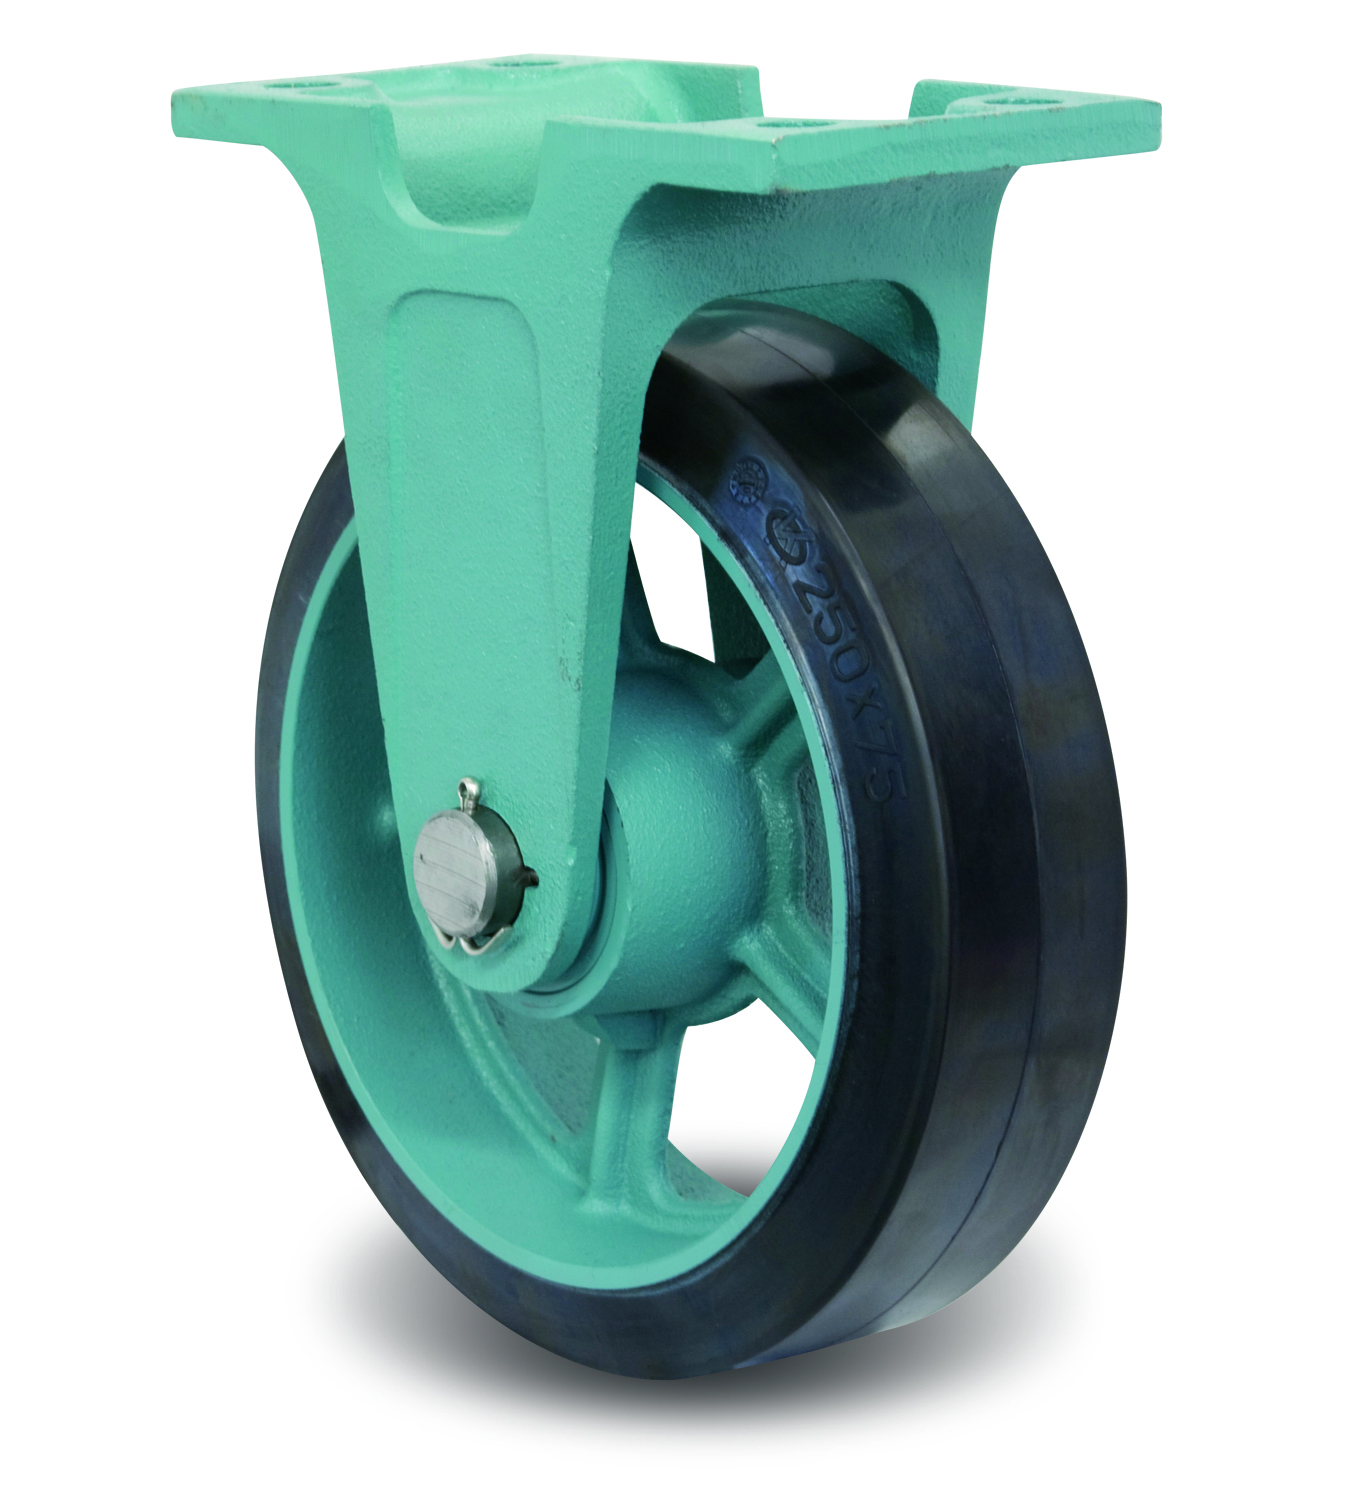 Ductile Caster Wide Type, Fixed MG-W Metal Fittings, E-MG-W EMG-W130X65